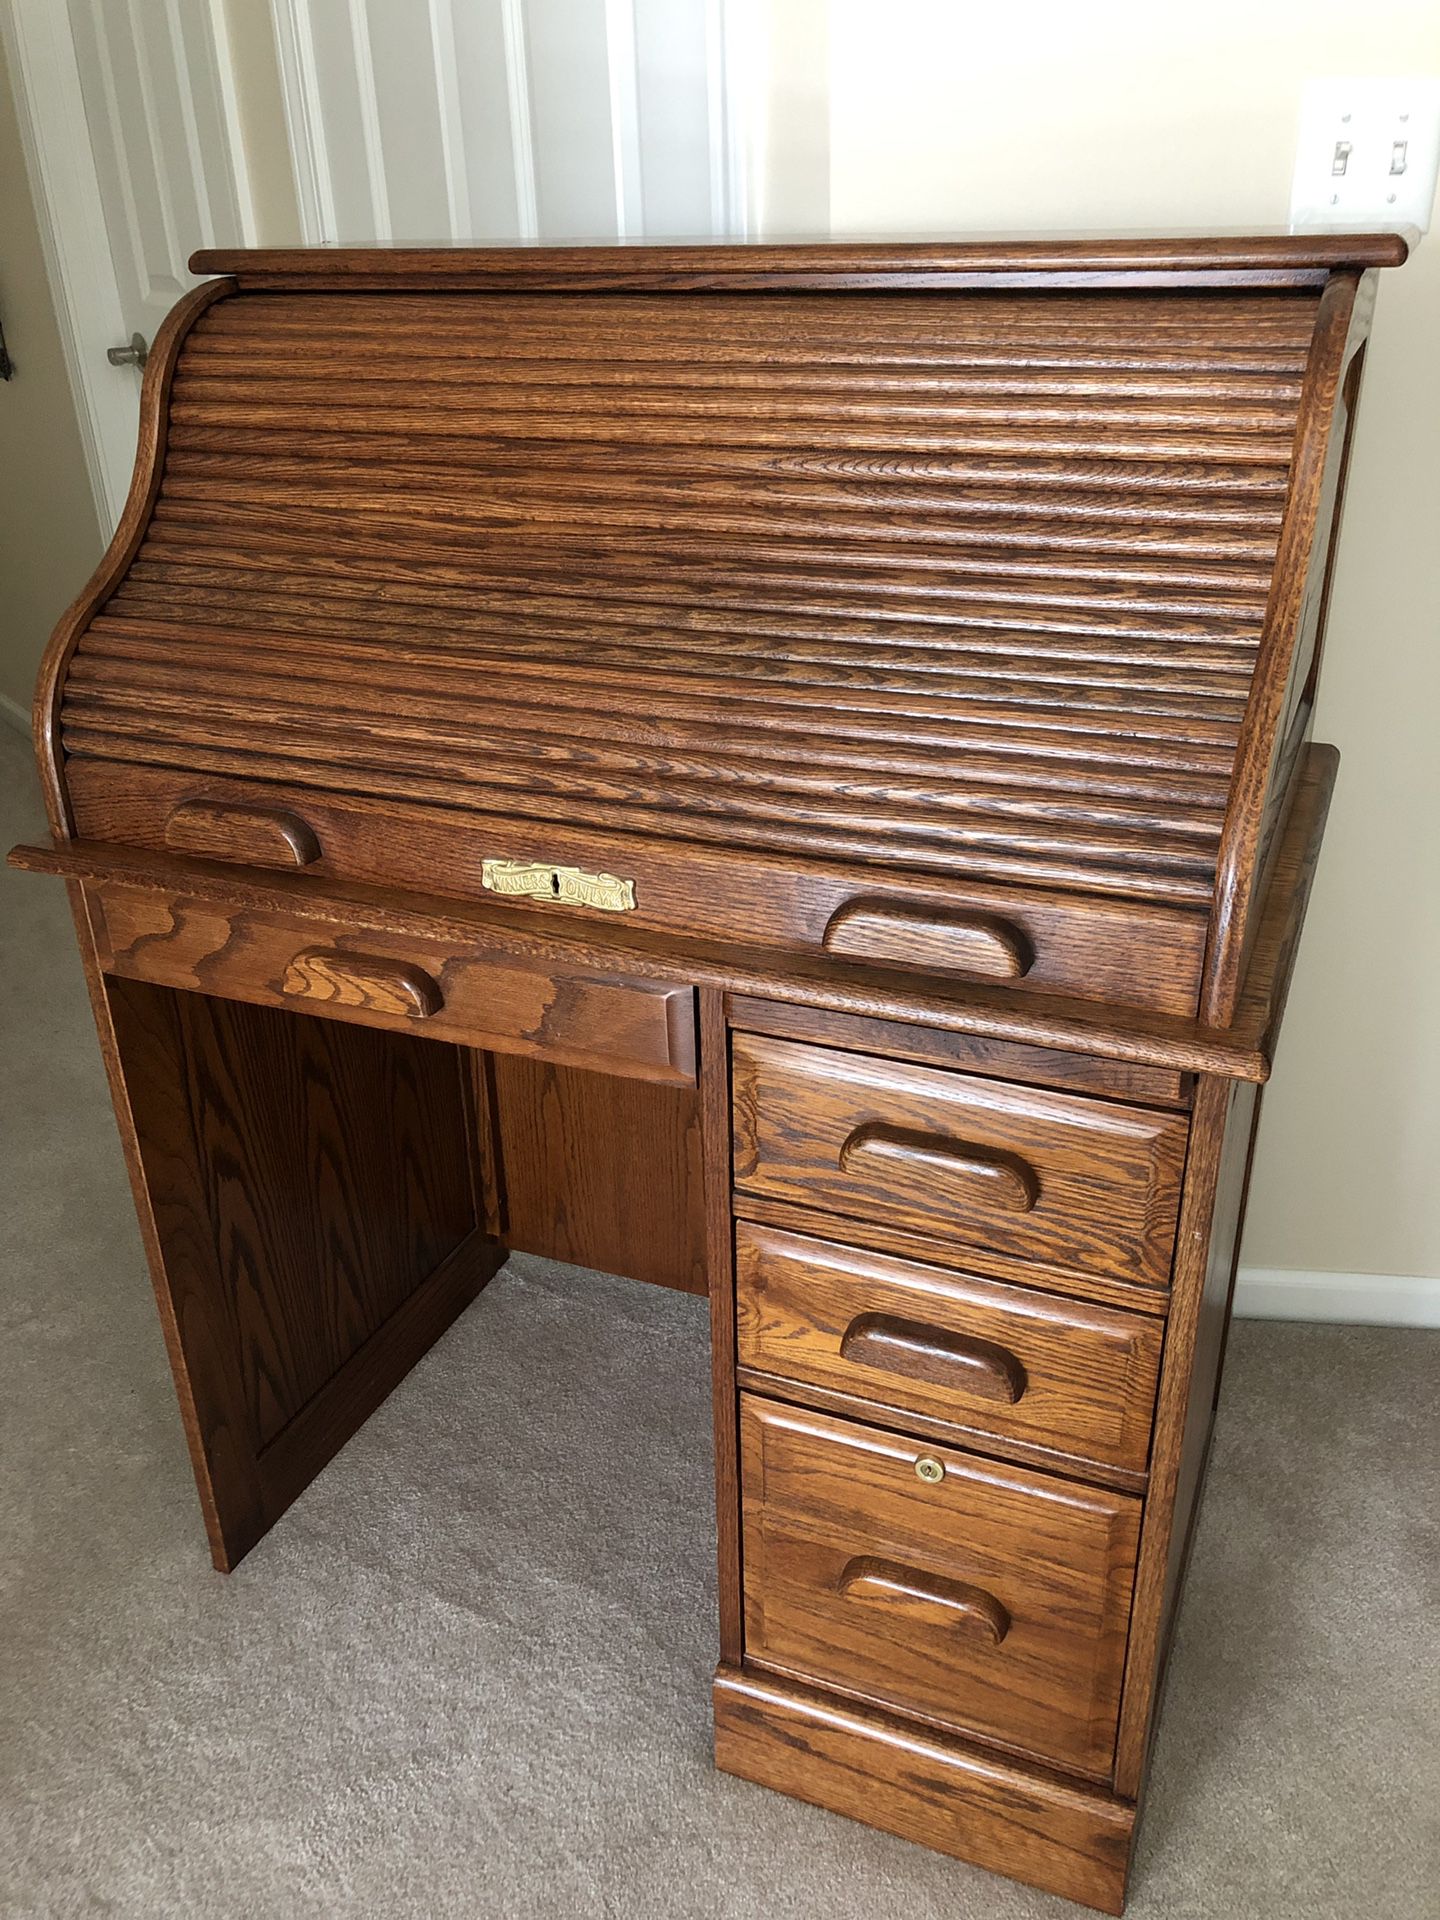 Beautiful Mahogany Secretary Desk. Very functional and beautiful decorative piece. Excellent condition.